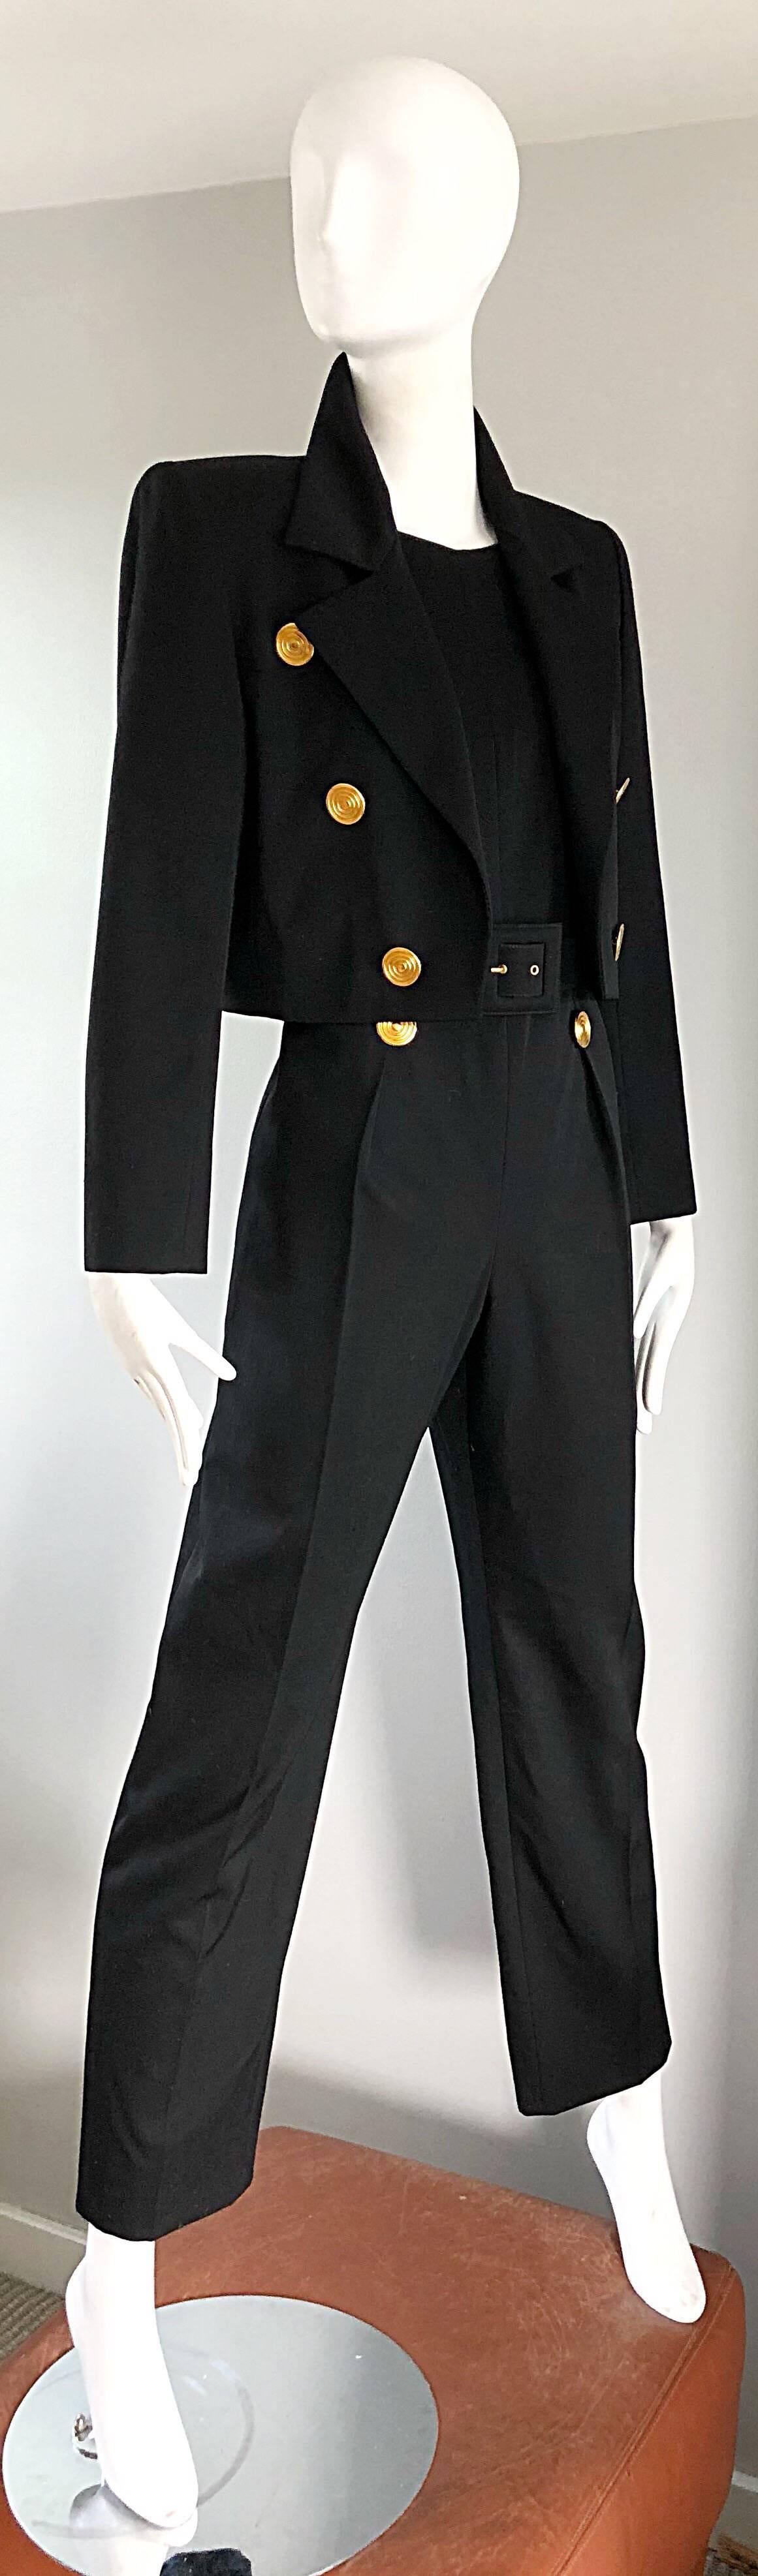 Alexander McQueen for Givenchy Couture Vintage Black Jumpsuit + Cropped Jacket  2